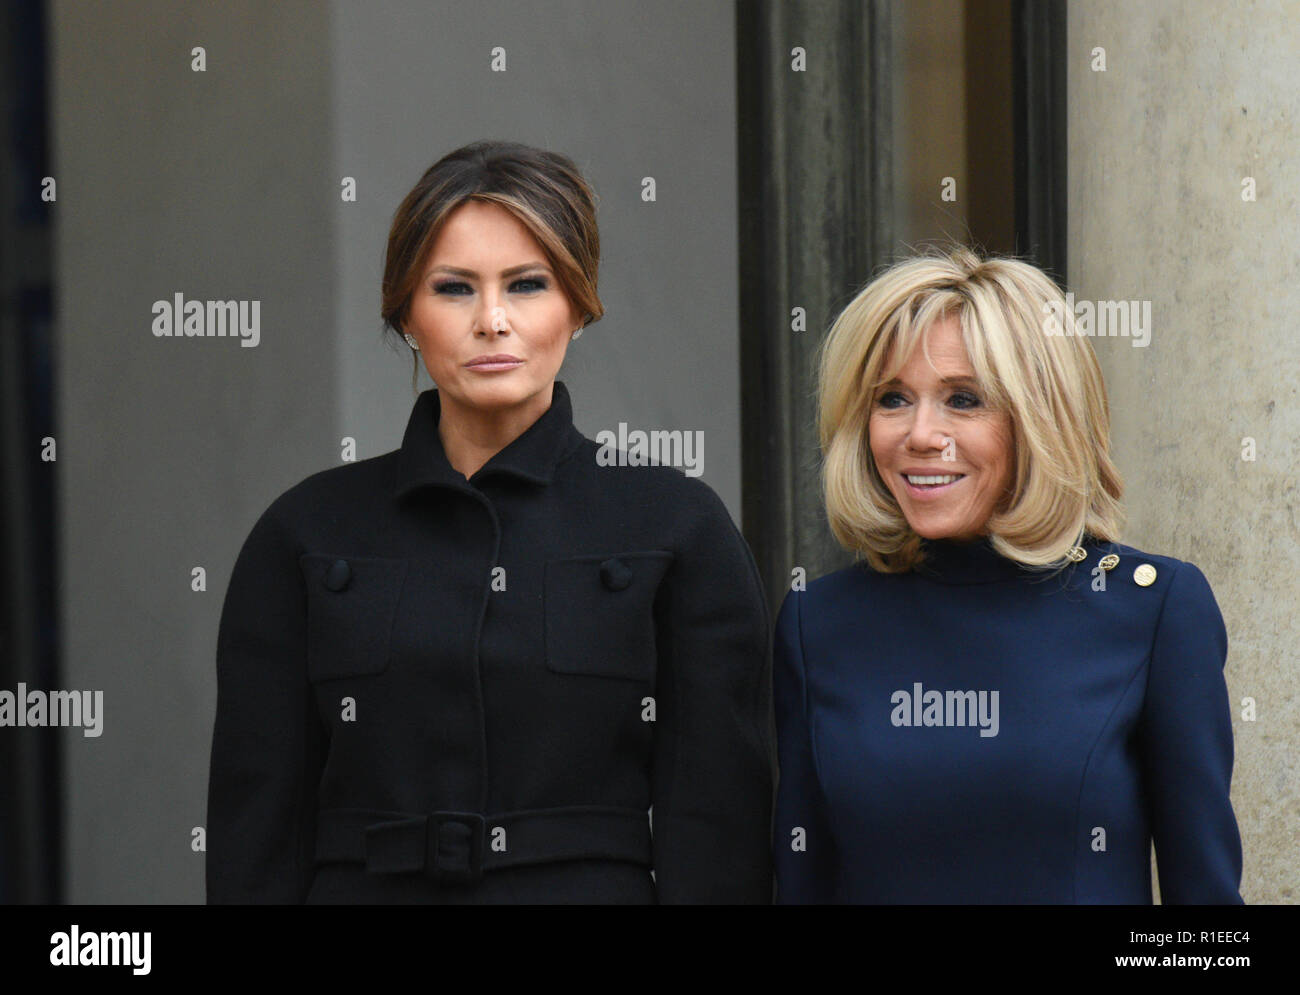 November 10, 2018 - Paris, France: The wife of French President Emmanuel Macron, Brigitte Macron meets US first lady Melania Trump at the Elysee palace. Brigitte Macron recoit la first lady americaine Melania Trump au palais de l'Elysee. *** FRANCE OUT / NO SALES TO FRENCH MEDIA *** Stock Photo